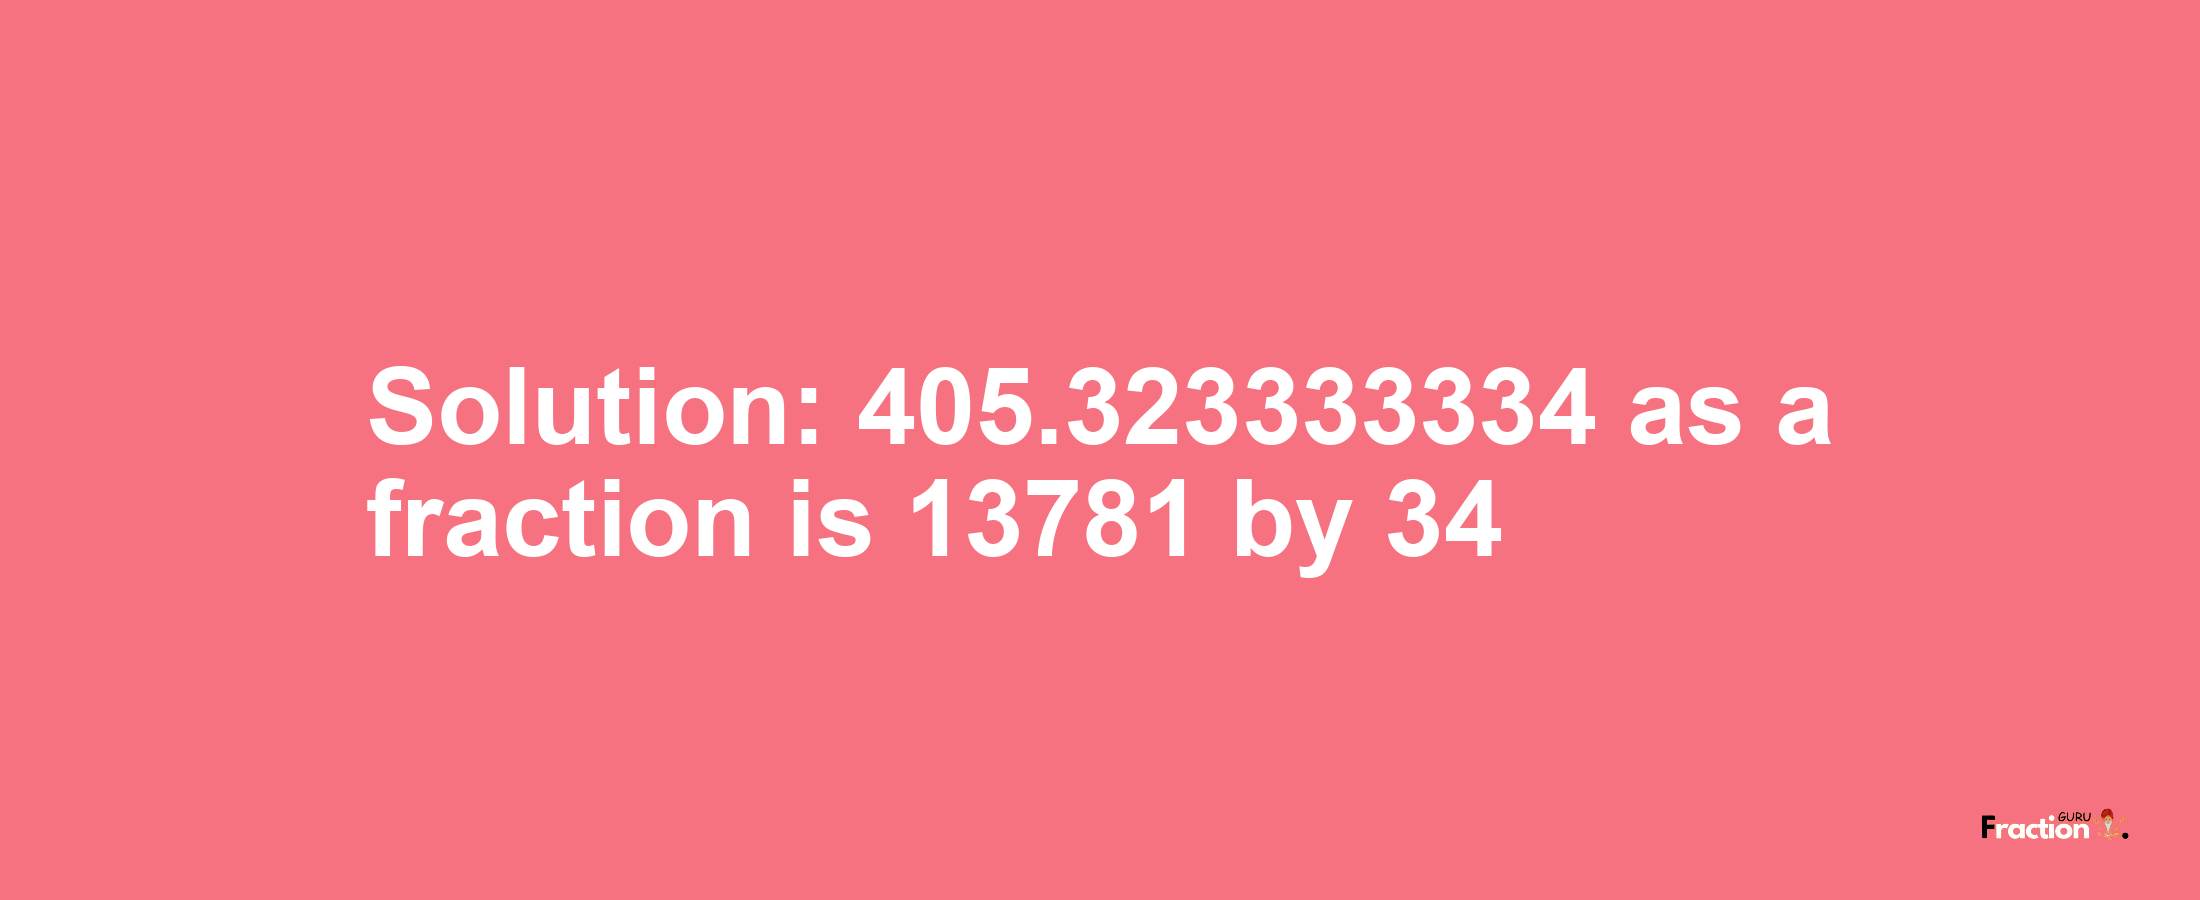 Solution:405.323333334 as a fraction is 13781/34